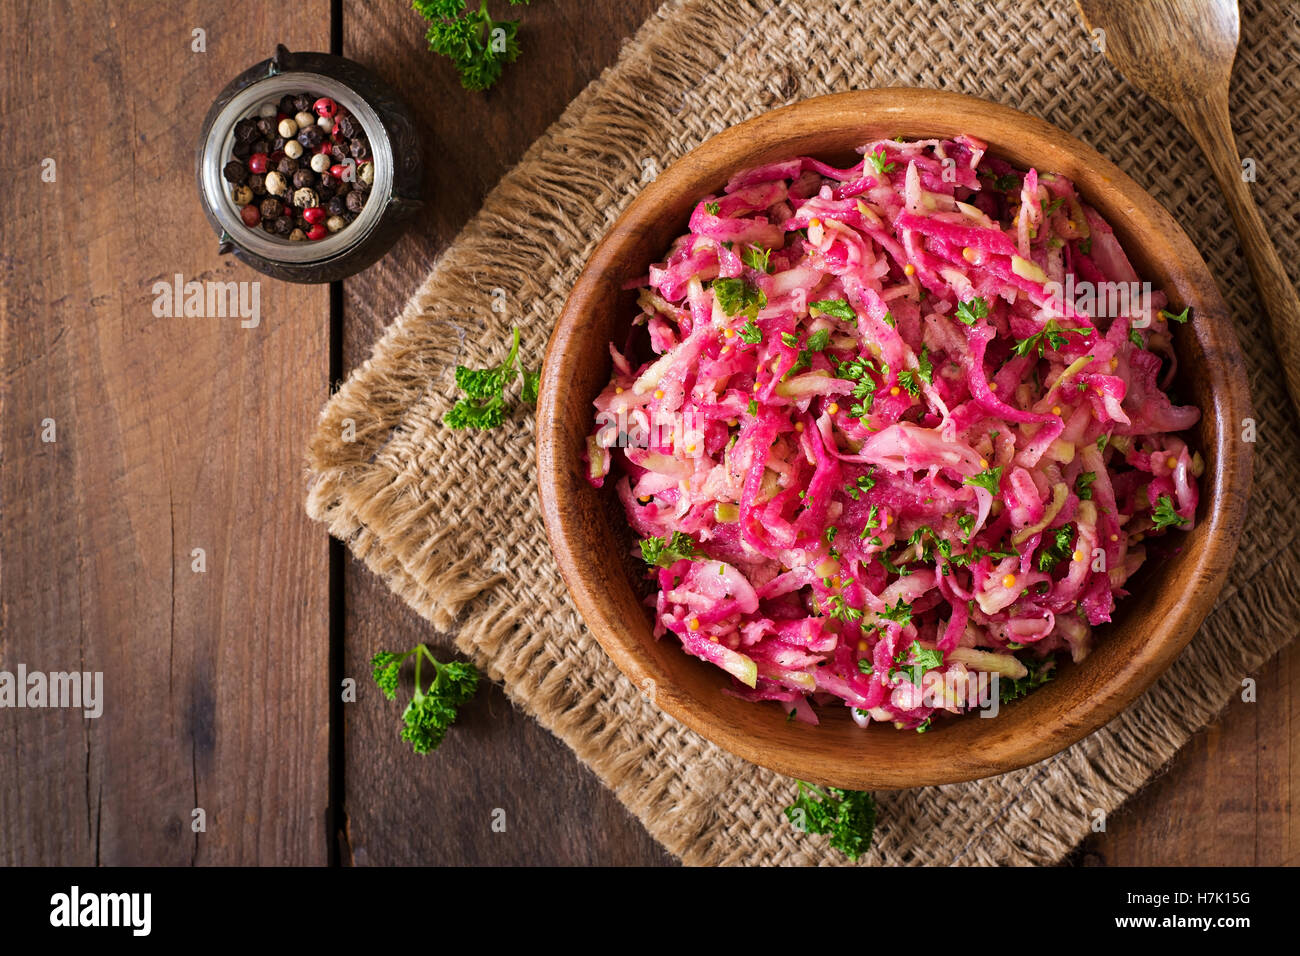 Pink daikon salad with apples, pickled onions and parsley. Top view Stock Photo